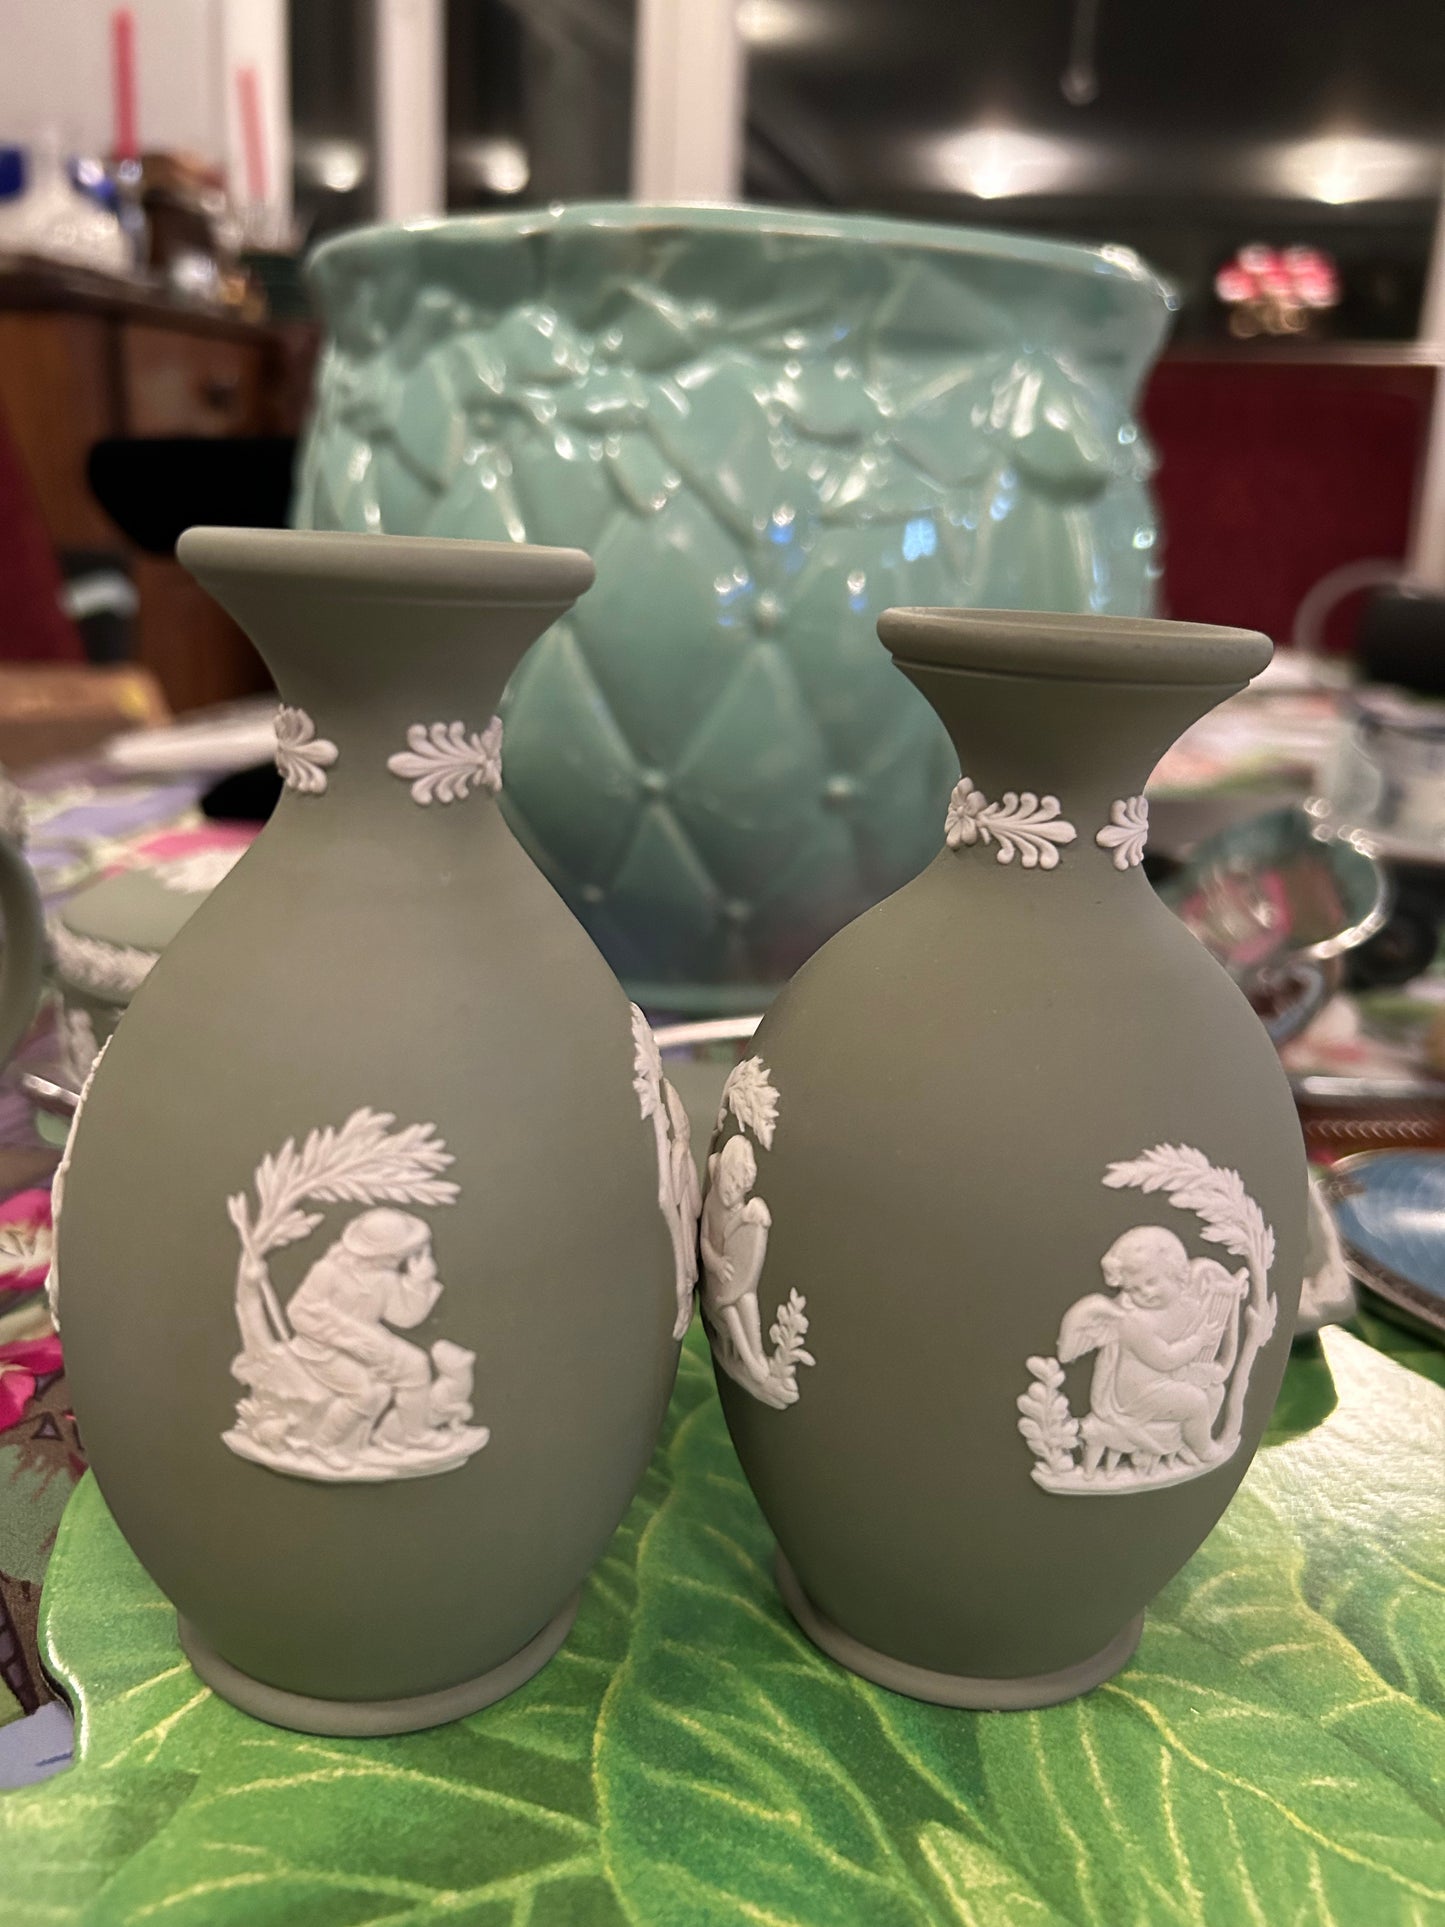 #6 pair of Green Wedgwood Vases 5” tall Sold Separately